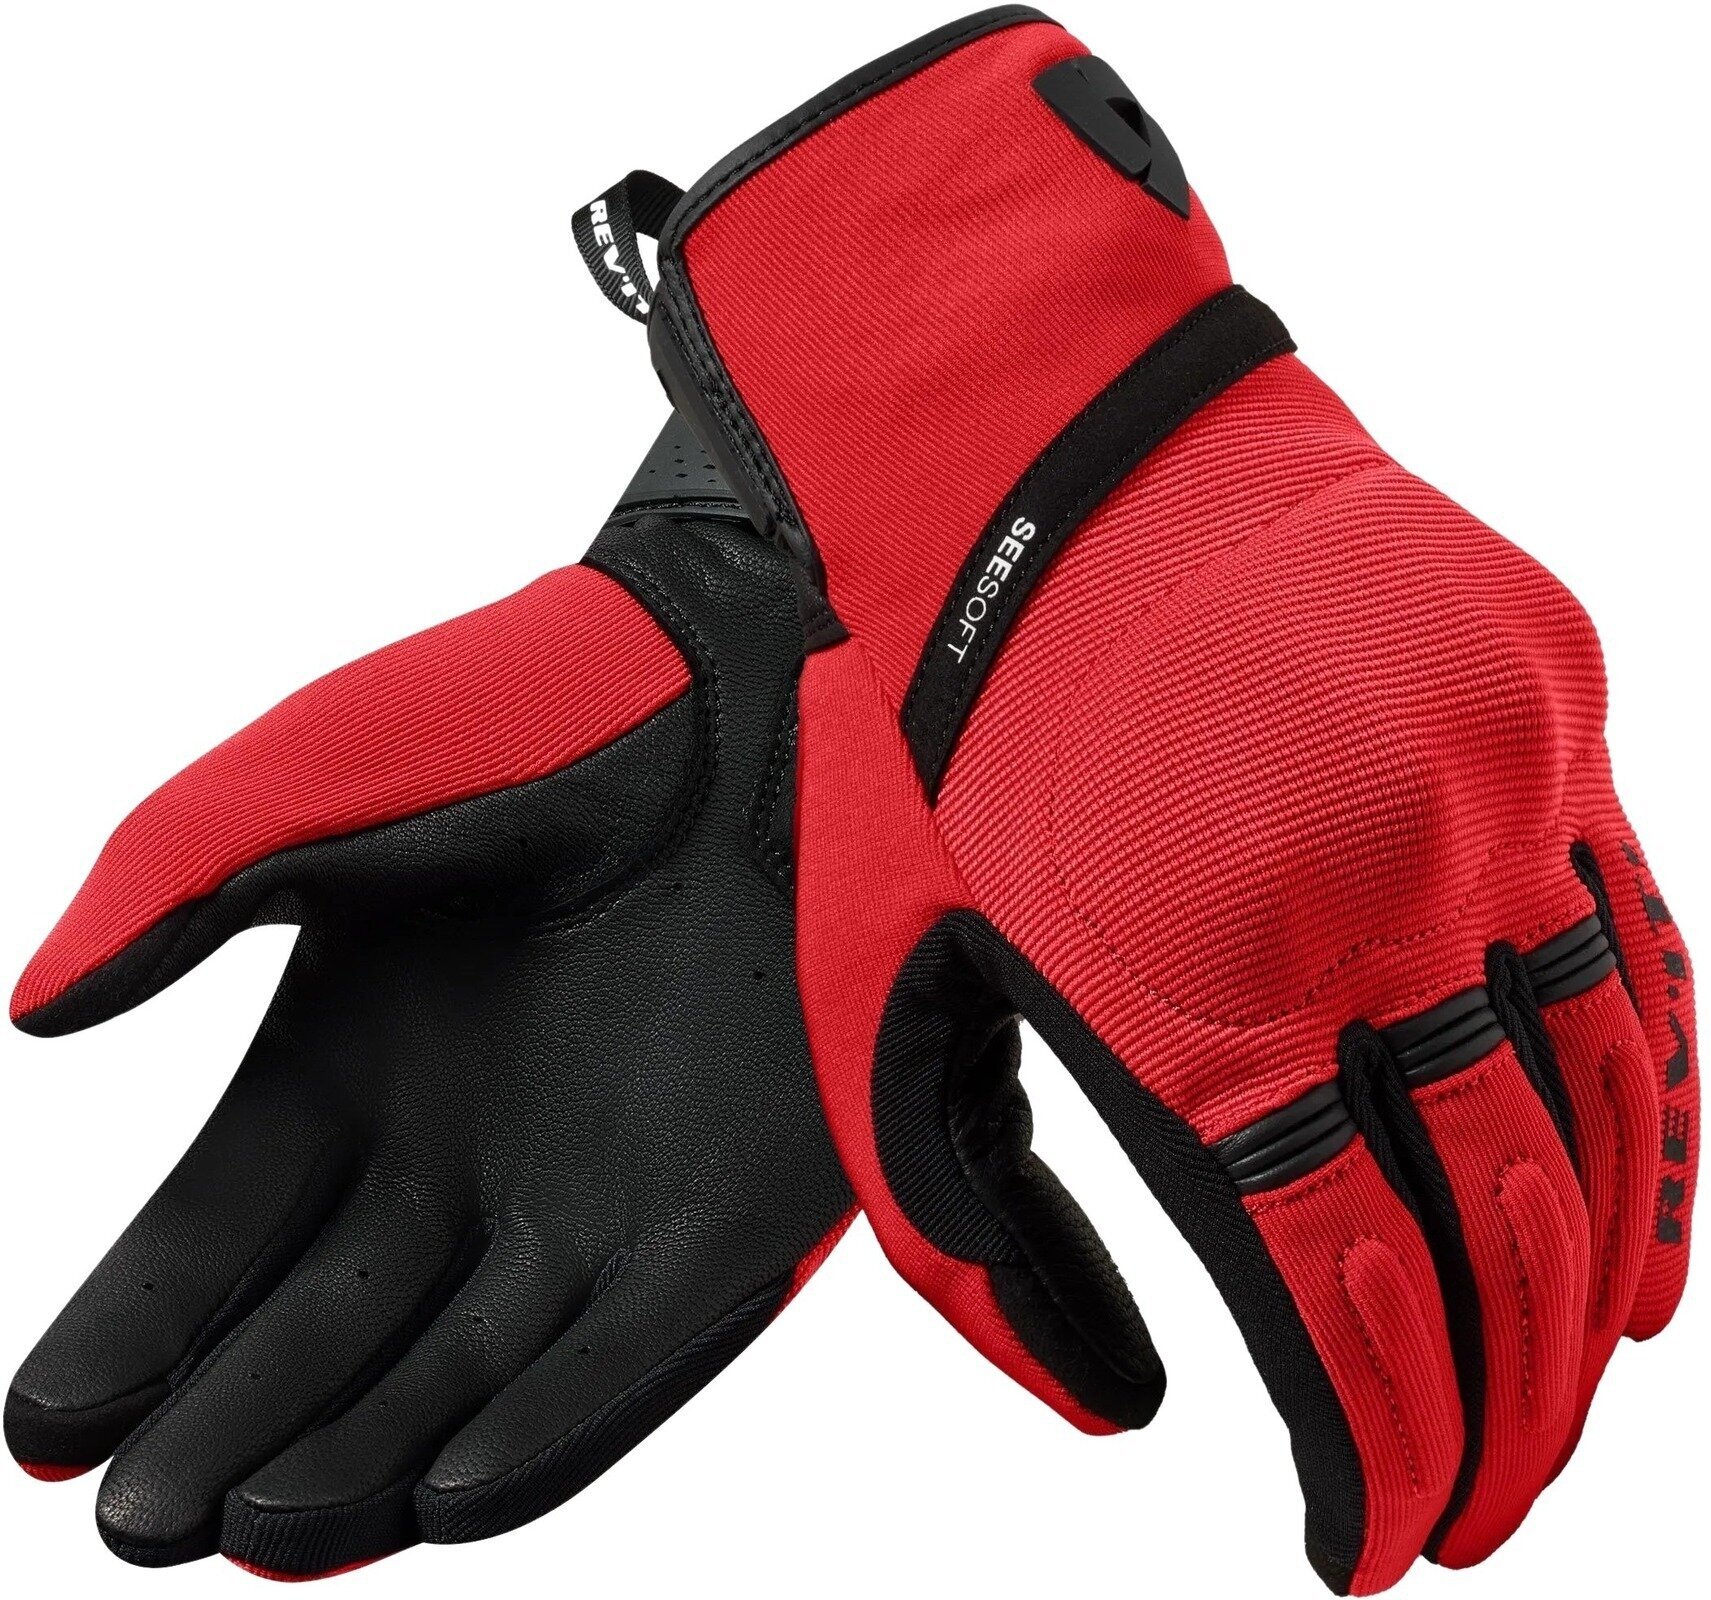 Motorcycle Gloves Rev'it! Gloves Mosca 2 Red/Black L Motorcycle Gloves